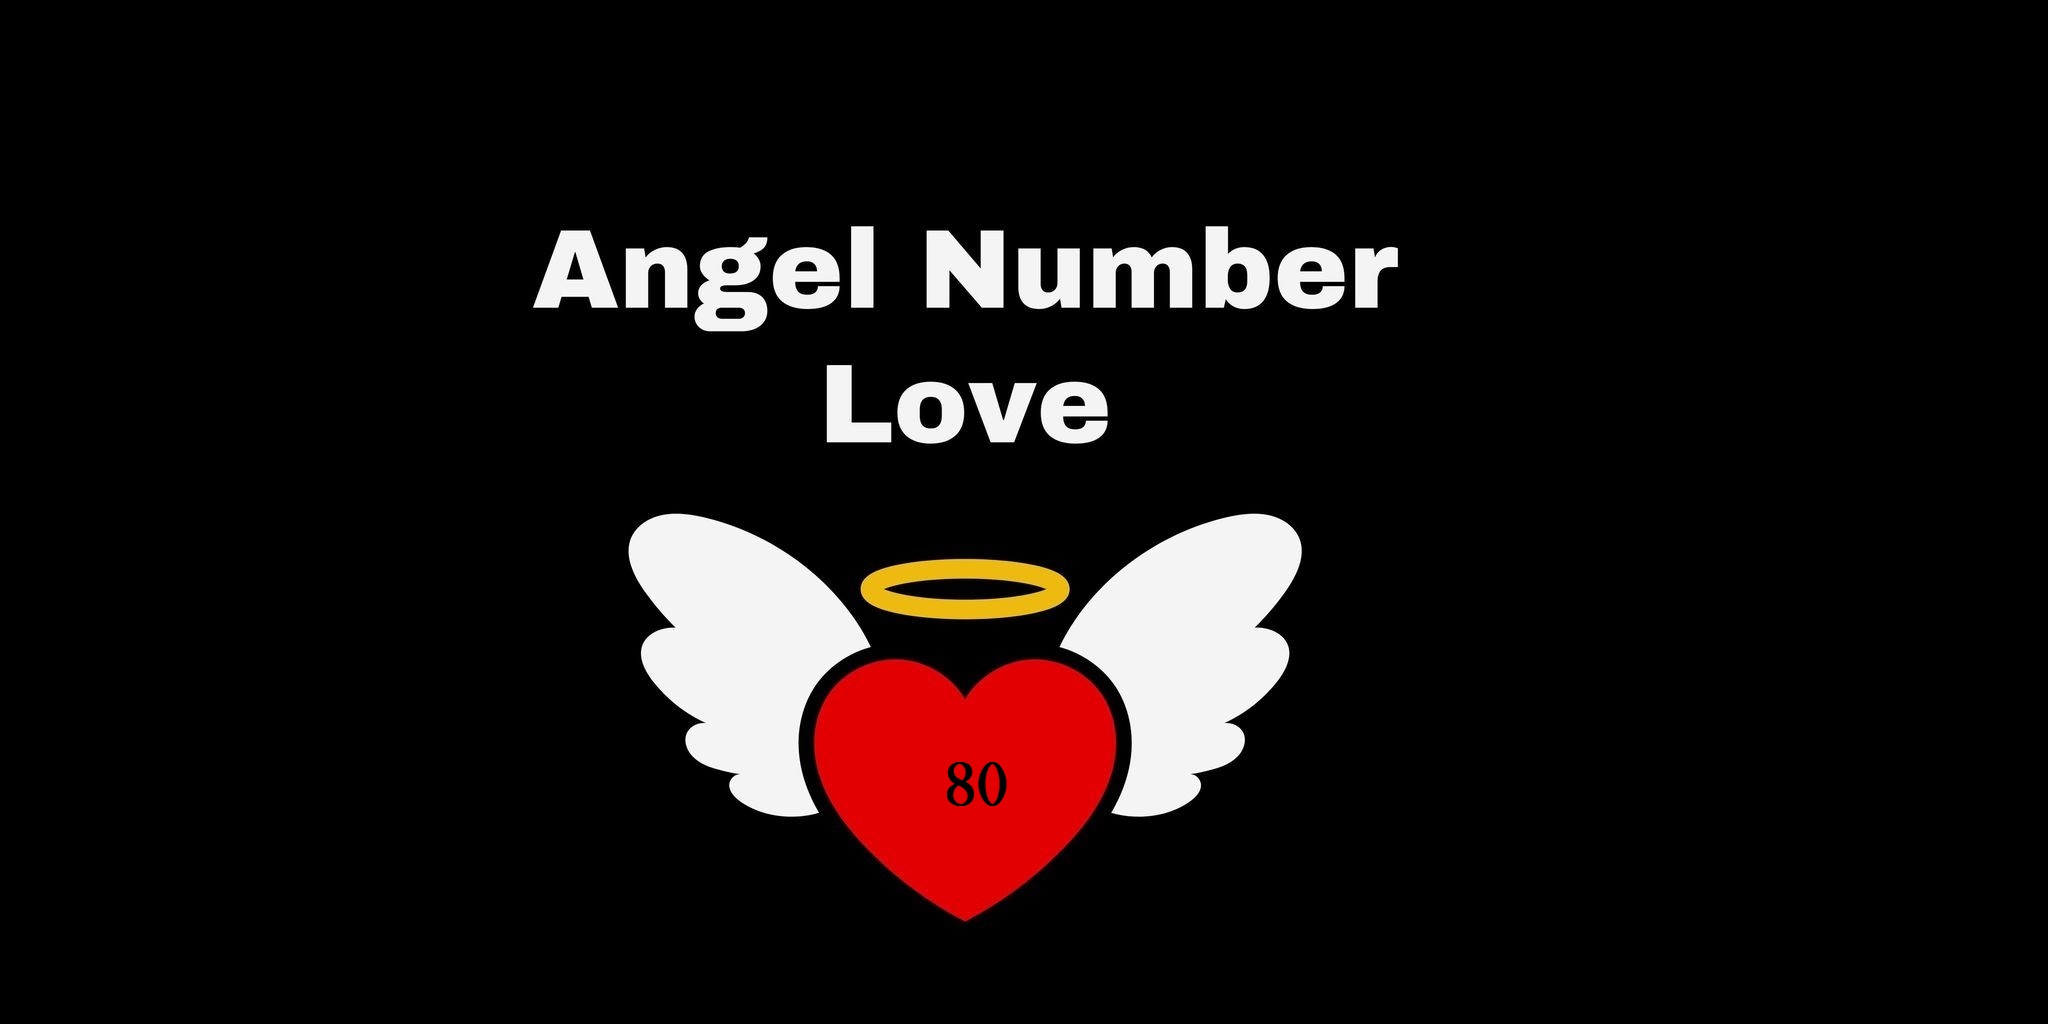 80 Angel Number Meaning In Love